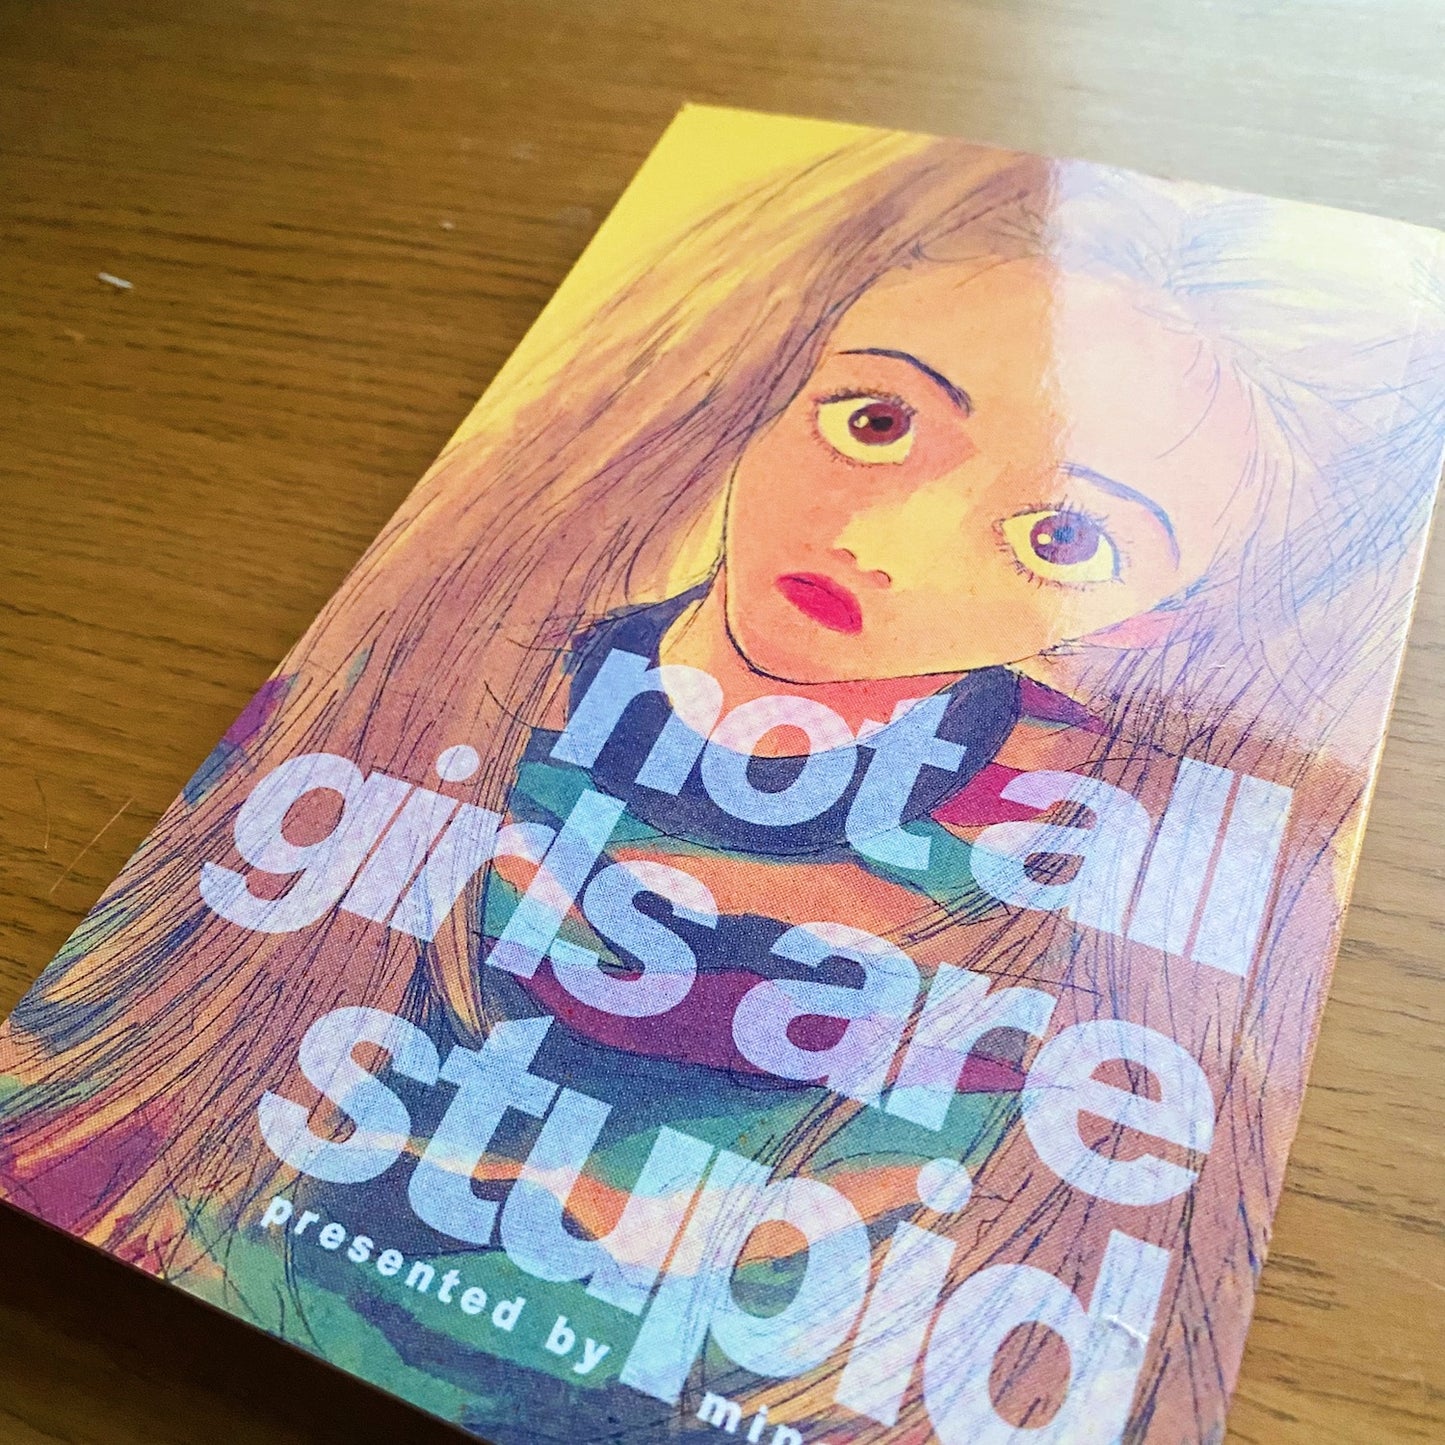 Not All Girls Are Stupid - By Minami Q-ta